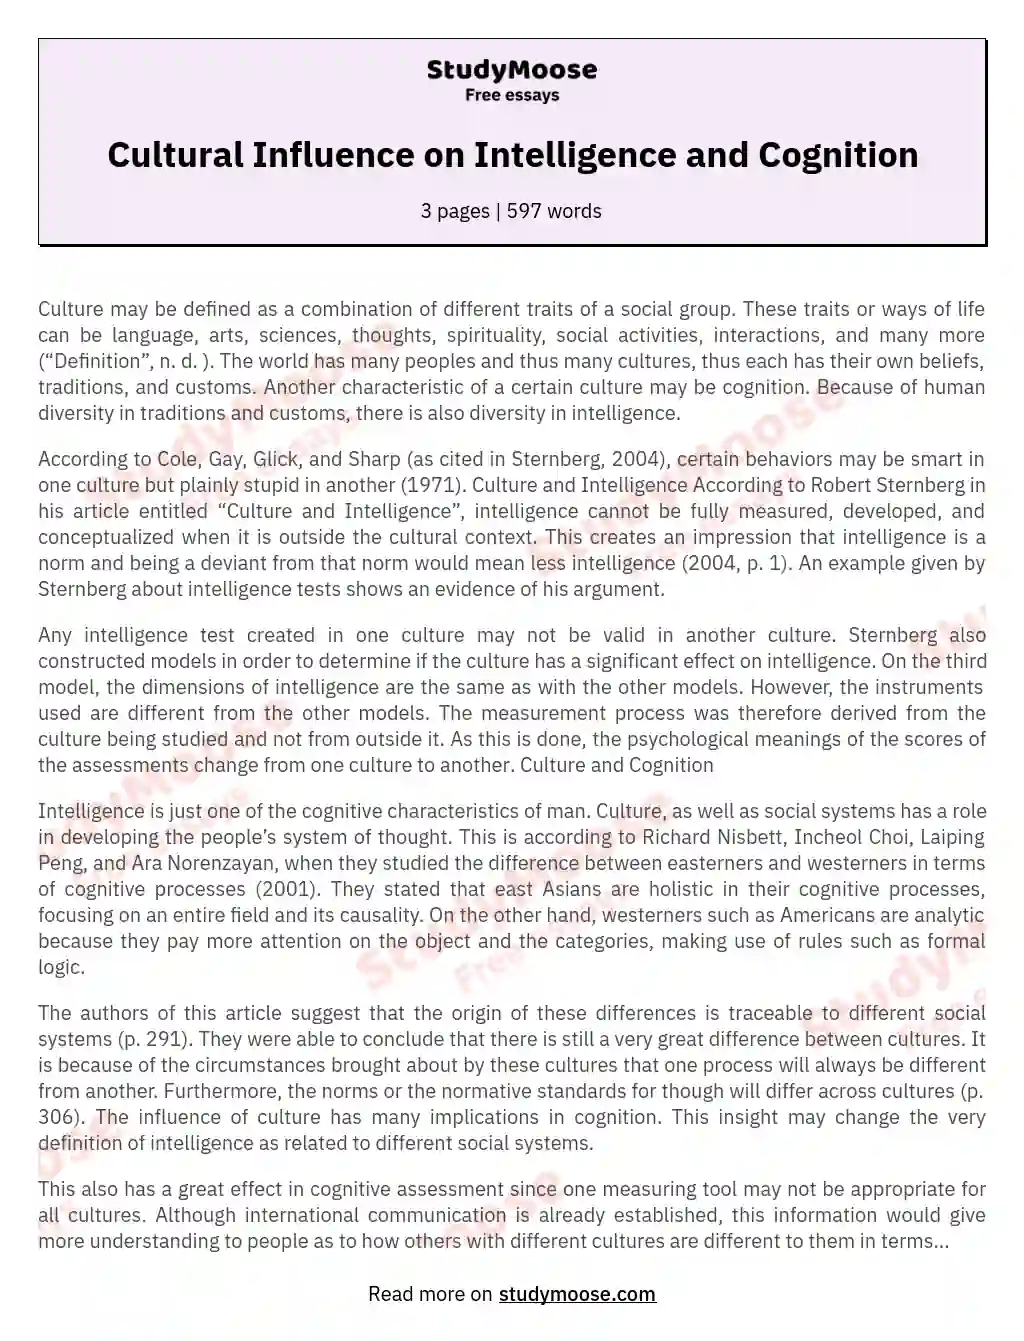 Cultural Influence on Intelligence and Cognition essay